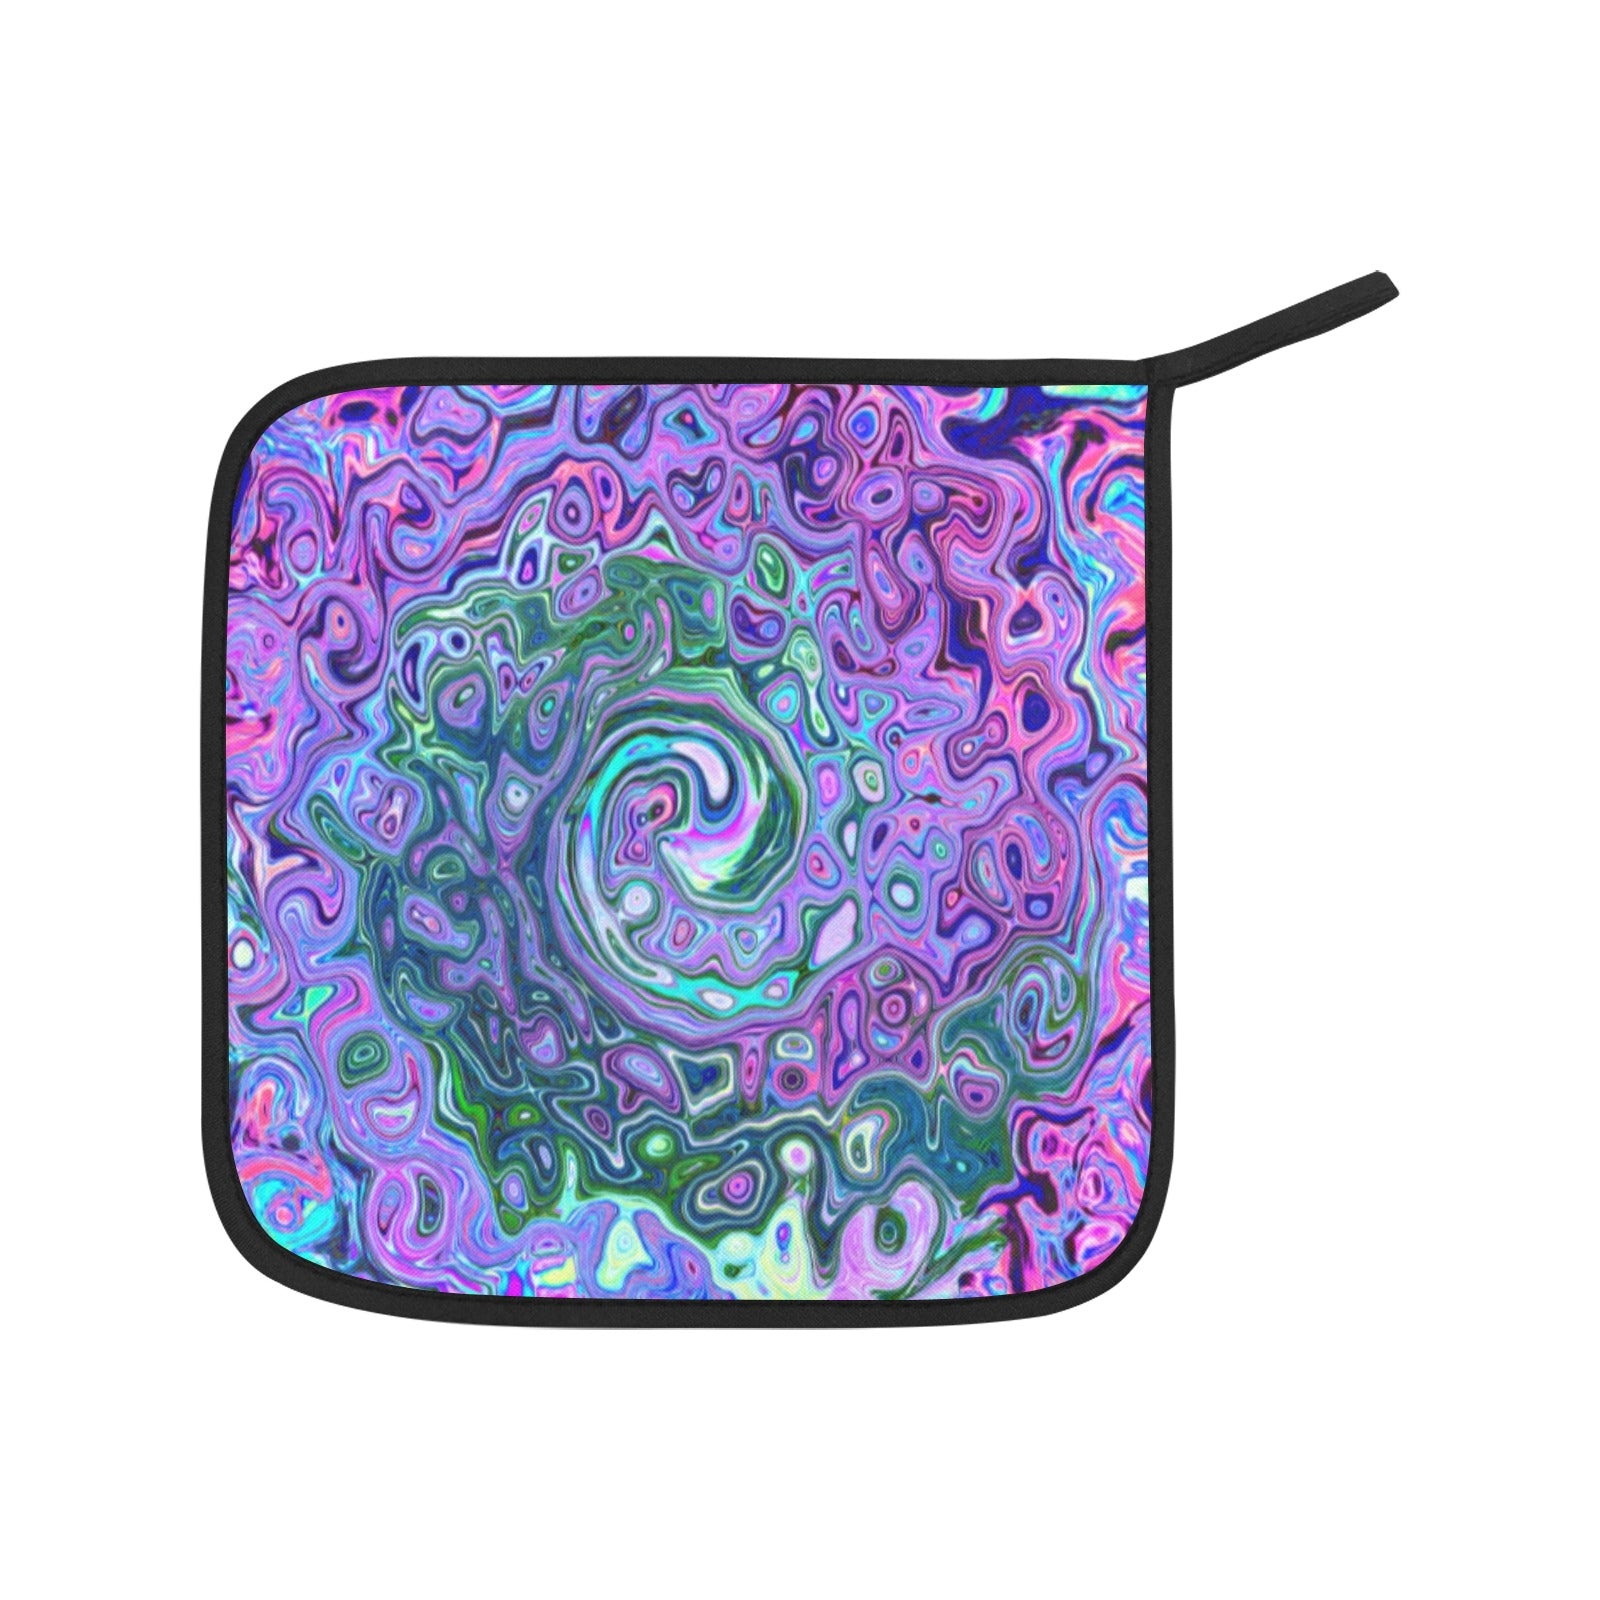 Oven Mitts and Pot Holders Set, Groovy Abstract Retro Green and Purple Swirl